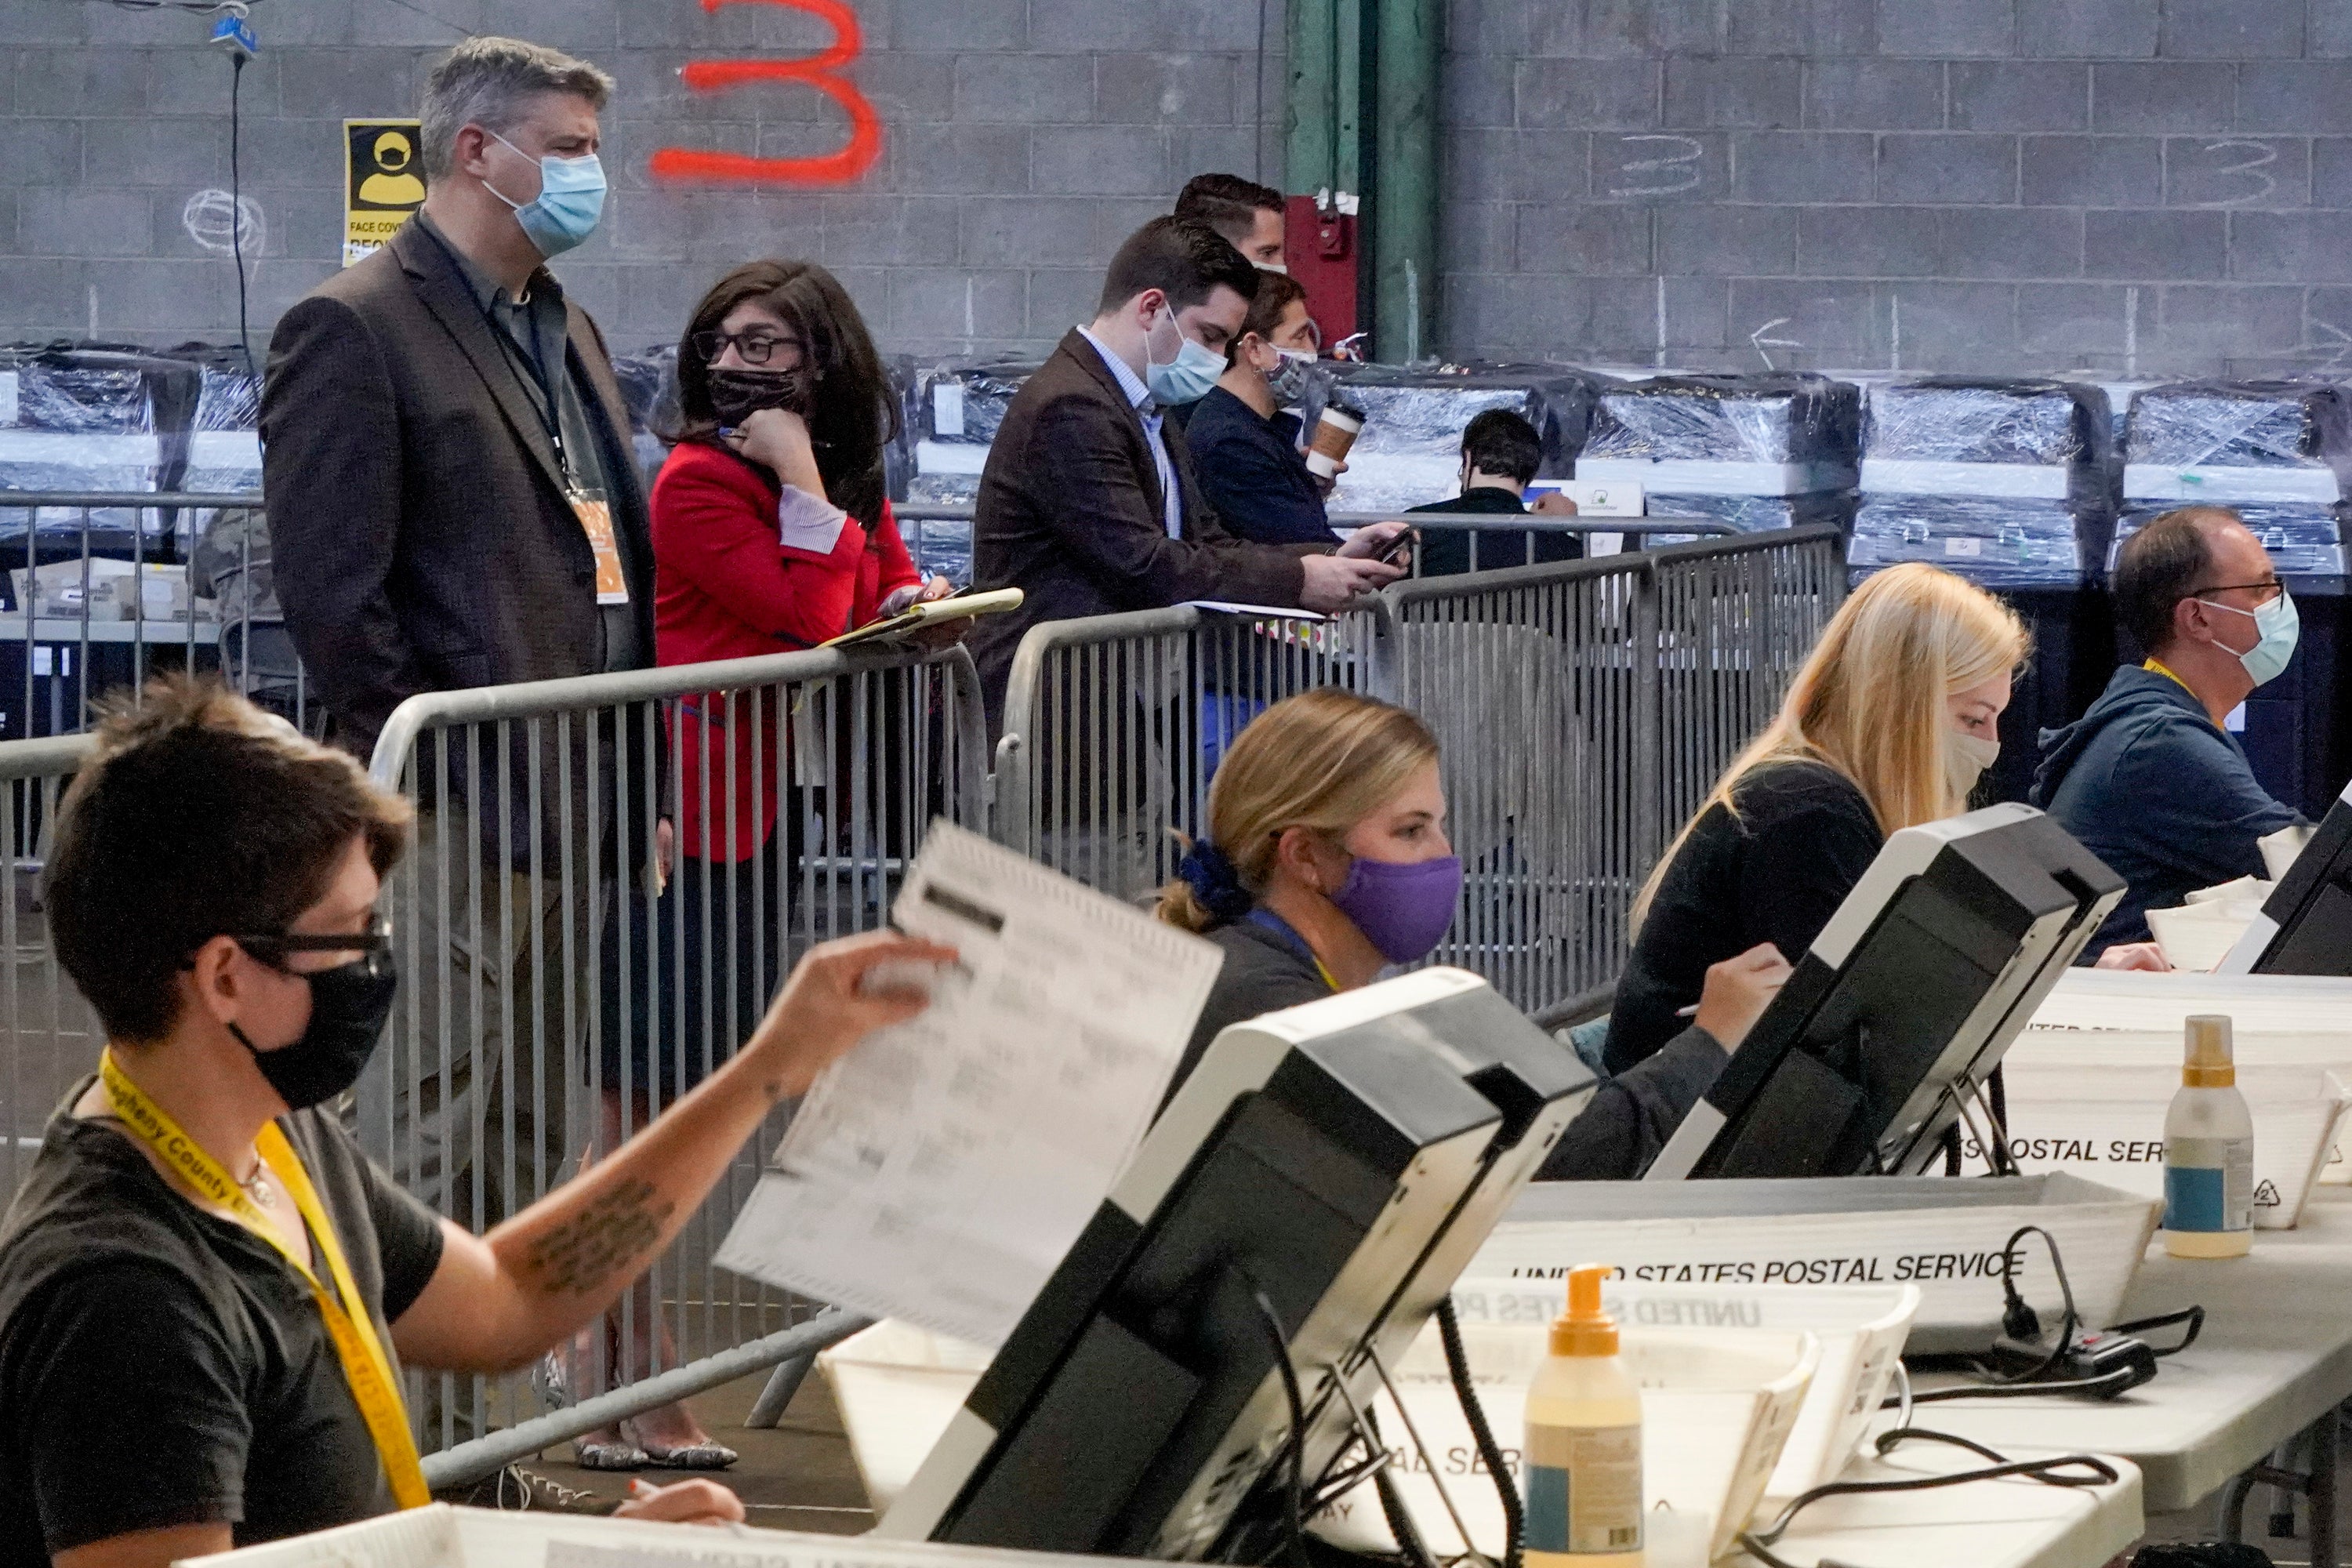 Election observers stand behind a barrier and watch as election office workers process ballots as counting continues from the general election at the Allegheny County elections returns warehouse in Pittsburgh on 6 November.